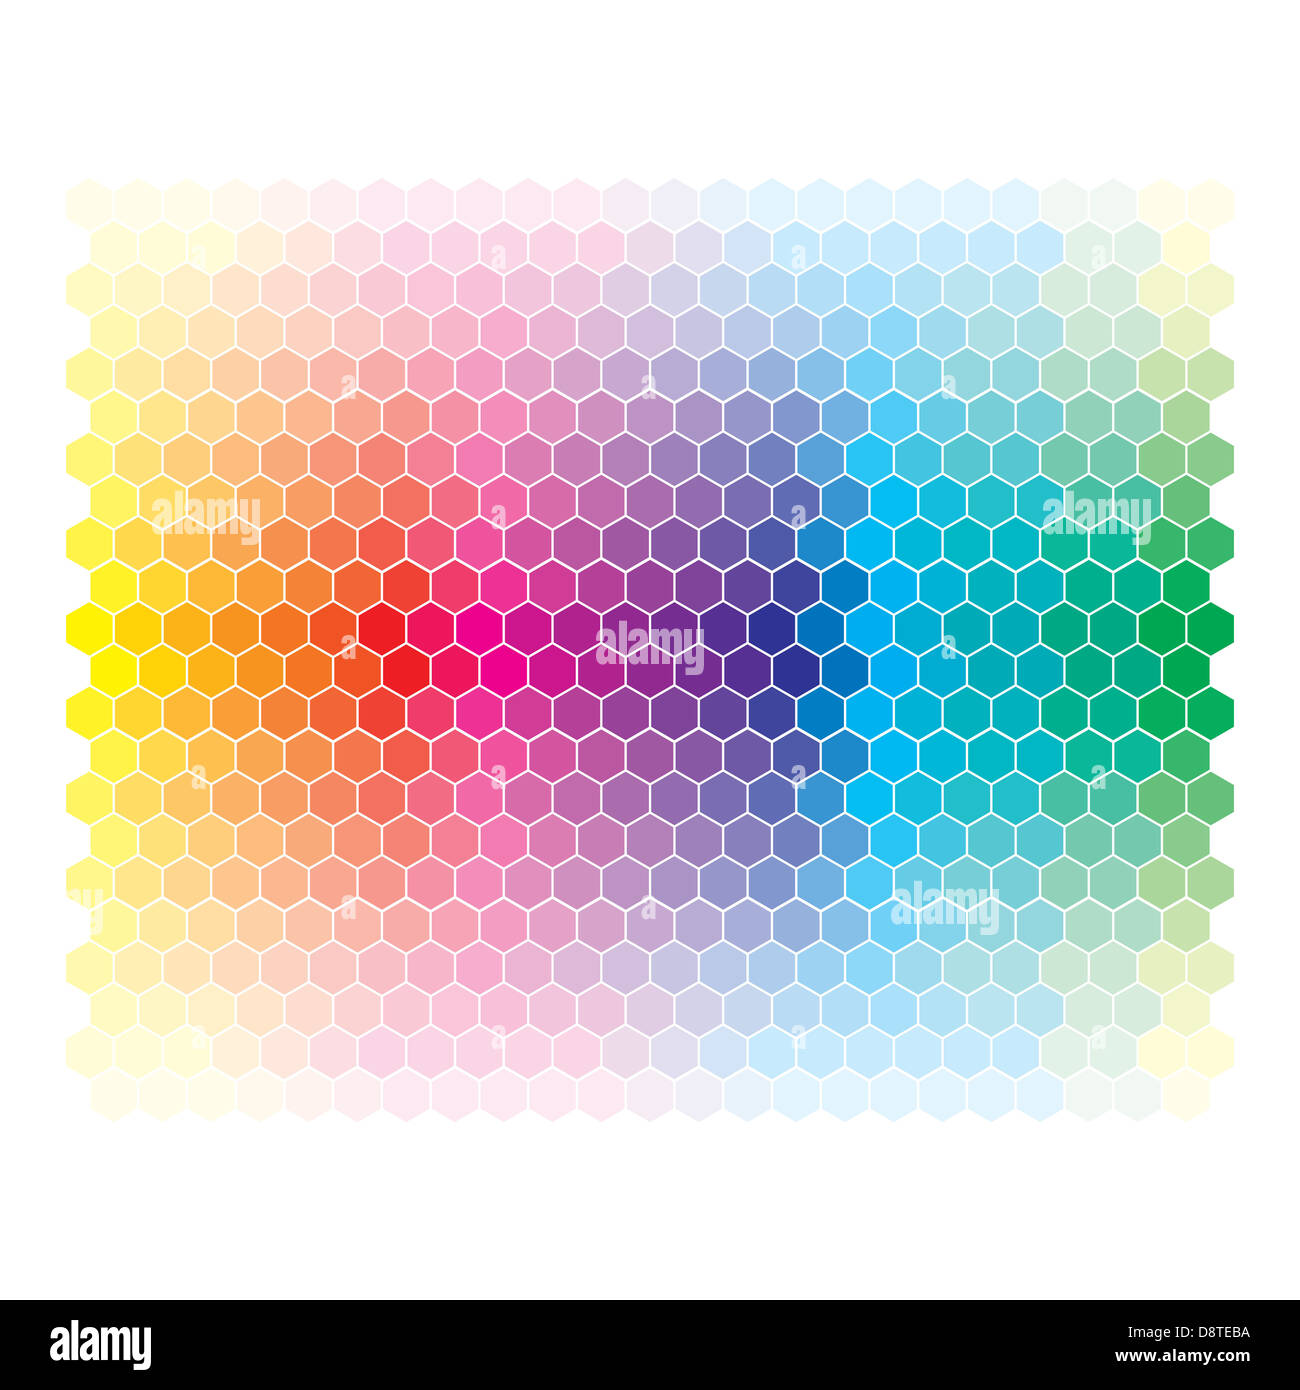 Color spectrum abstract wheel, colorful diagram background Stock Photo